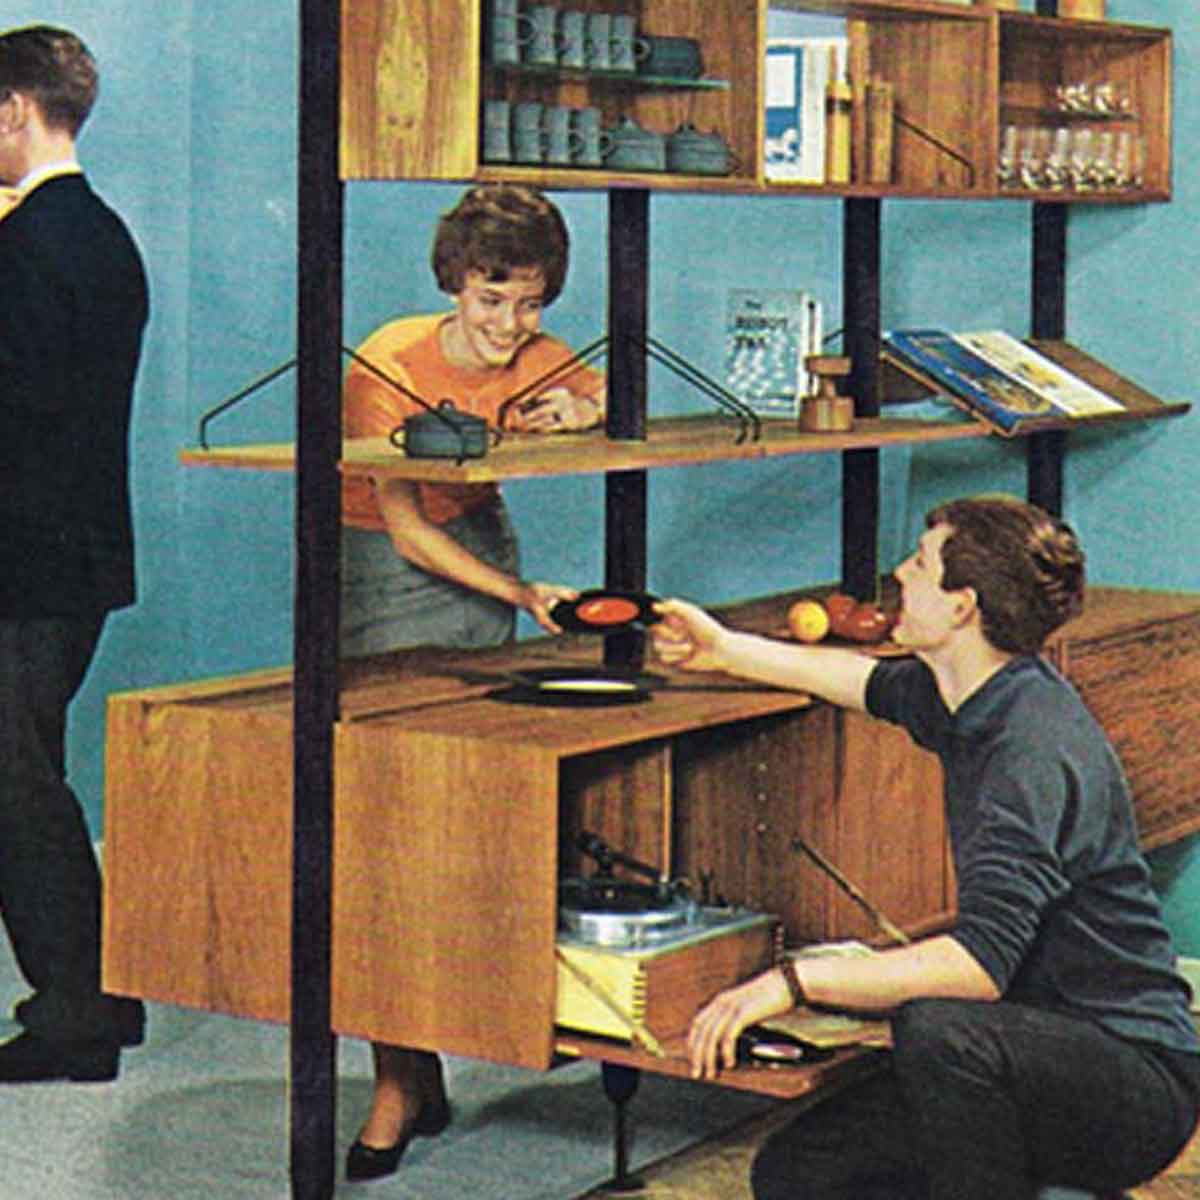 A 1950s illustration of 2 people selecting records to play.